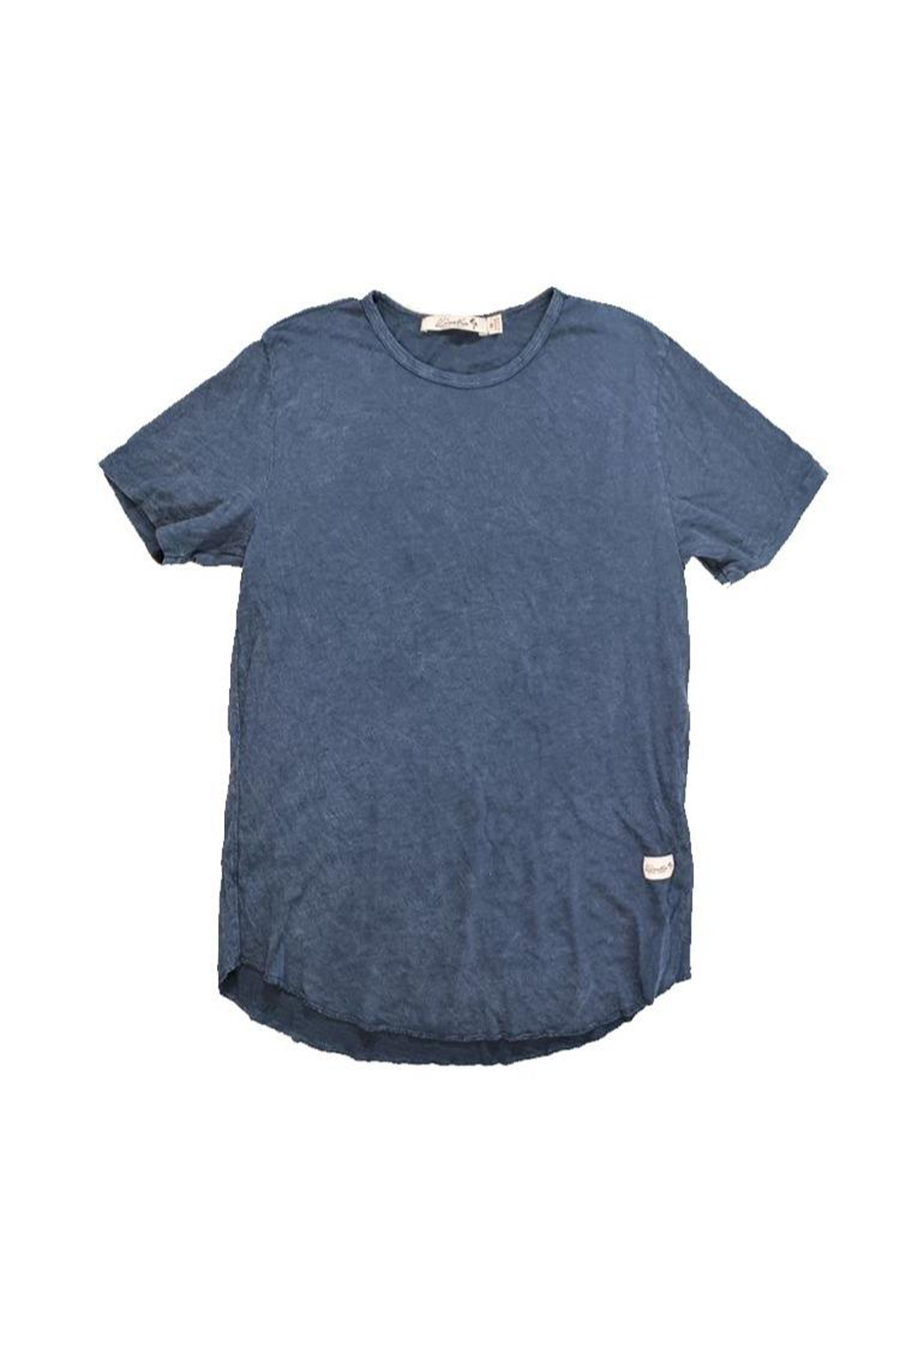 4 Corners Basic Tee | Blue Mineral - Main Image Number 1 of 1